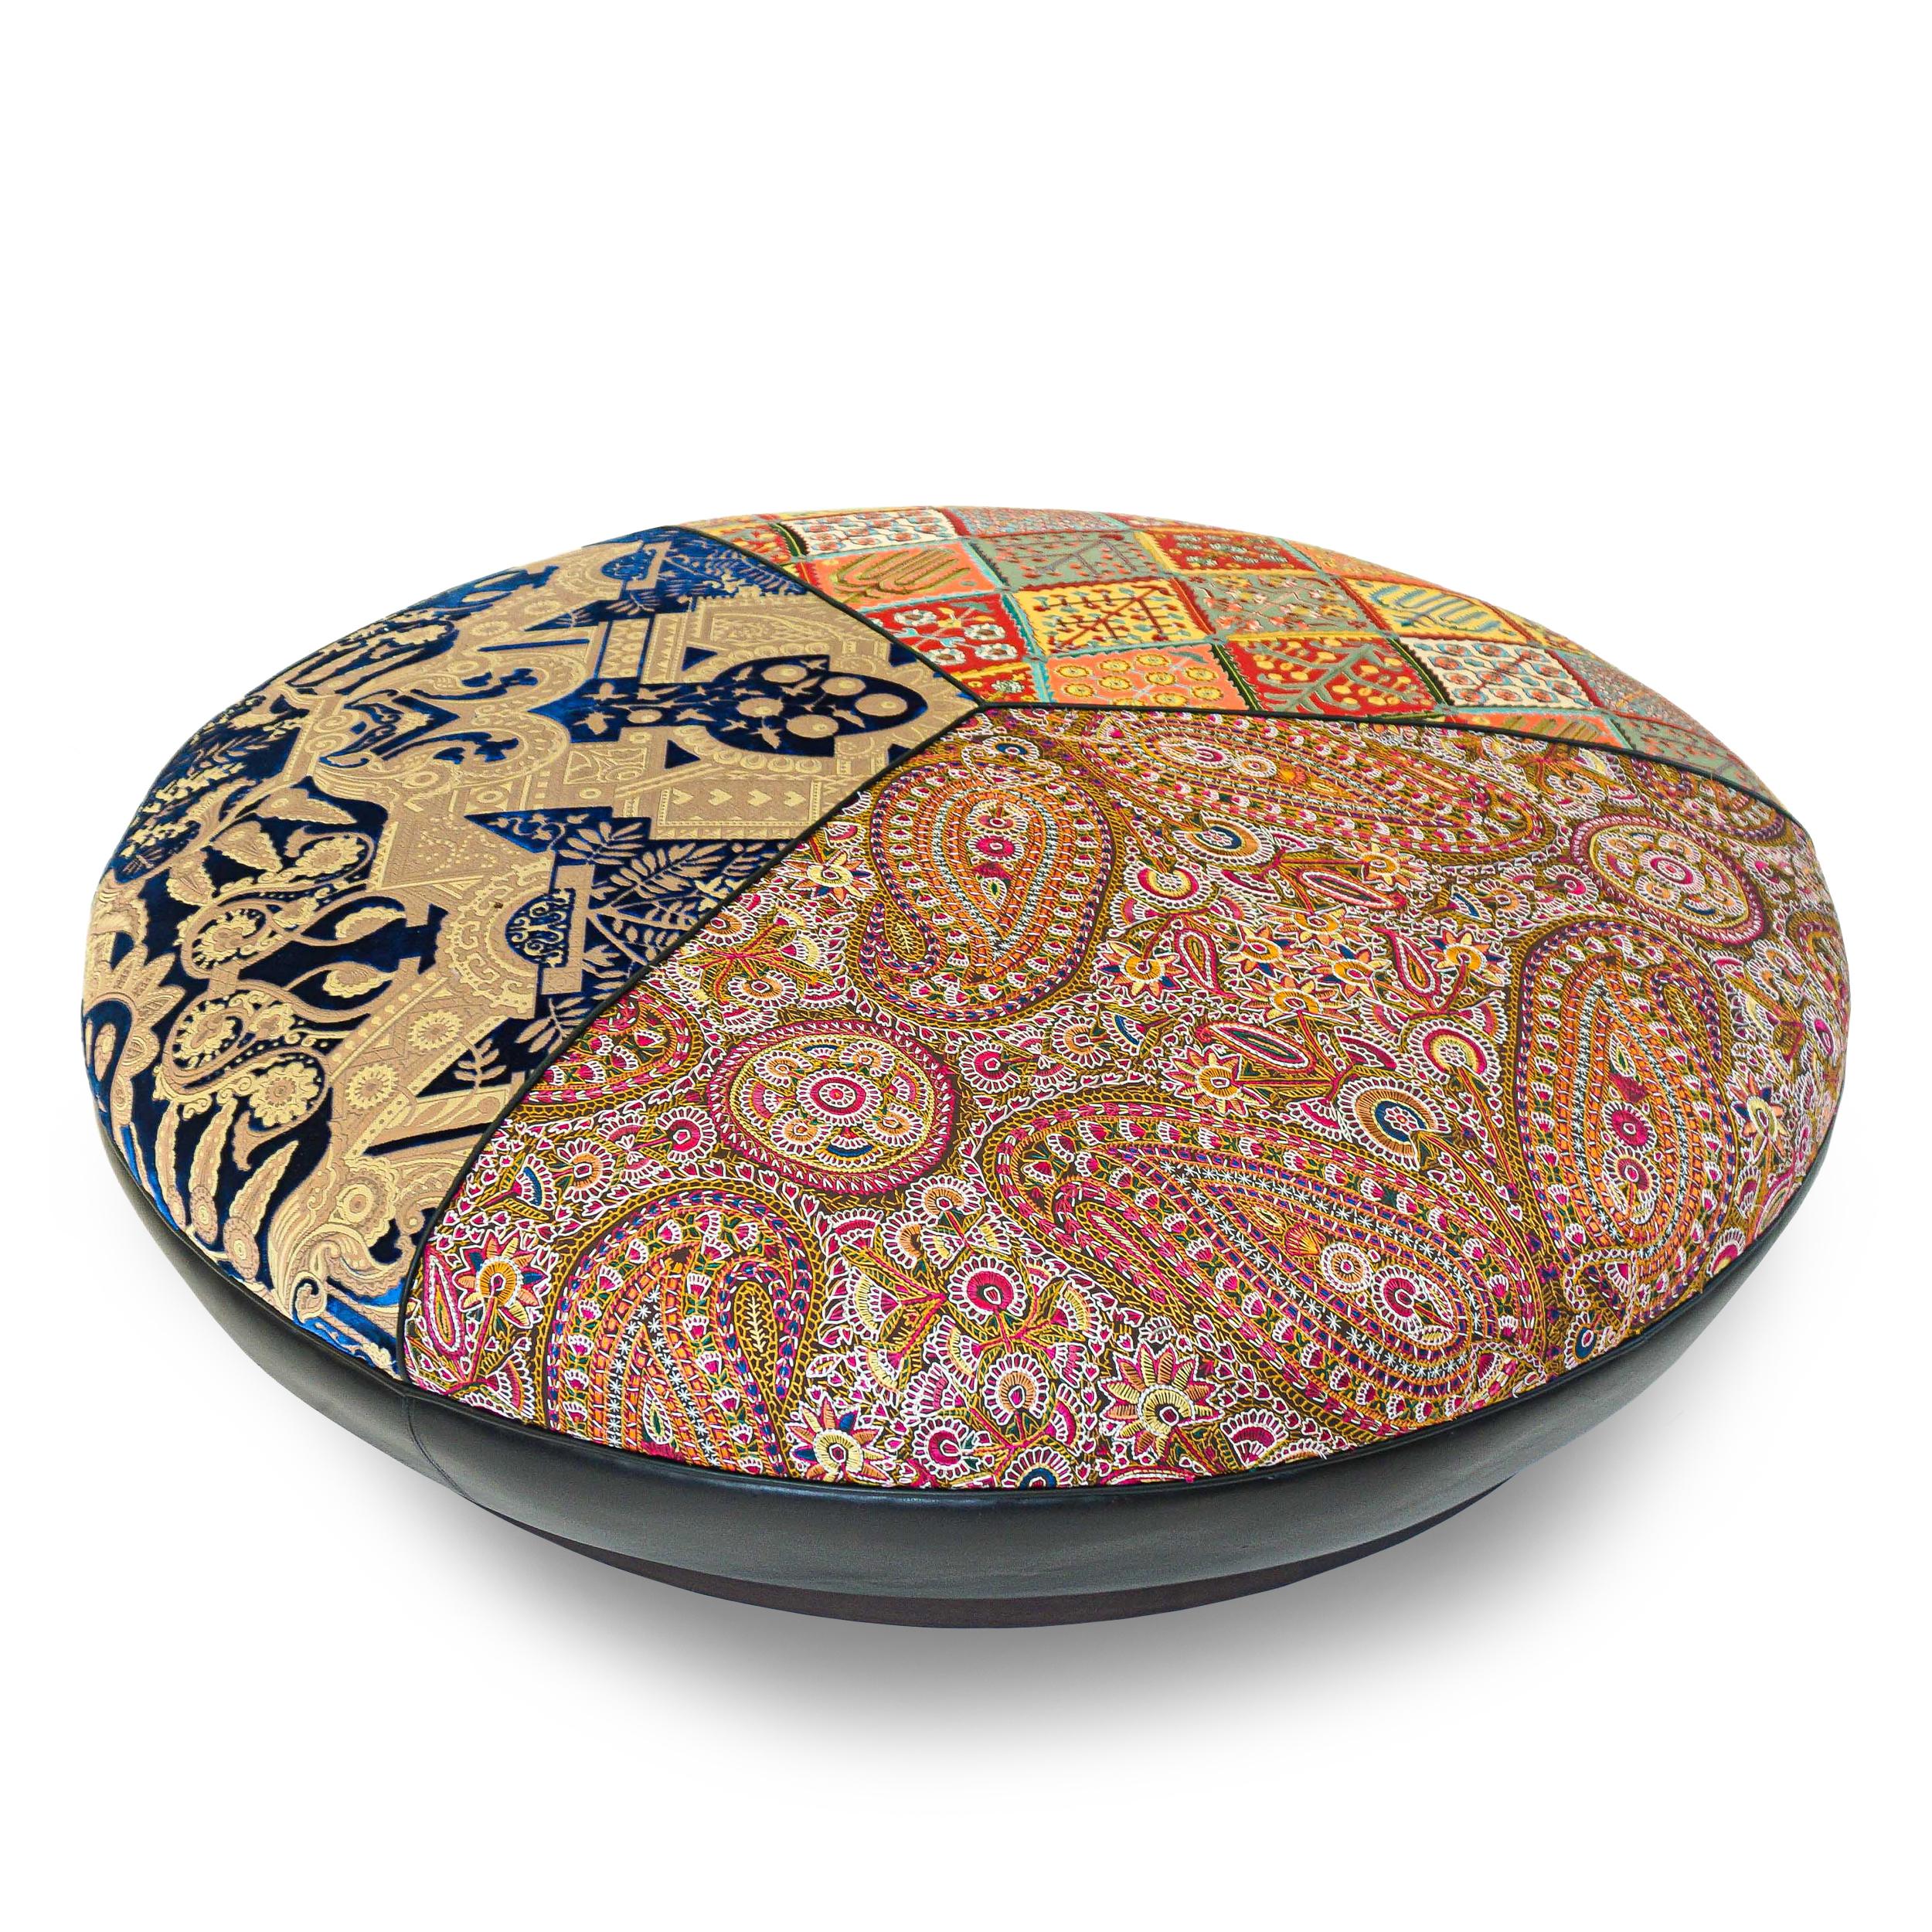 Large Round Upholstered Moroccan-Inspired Ottoman, Customizable For Sale 6